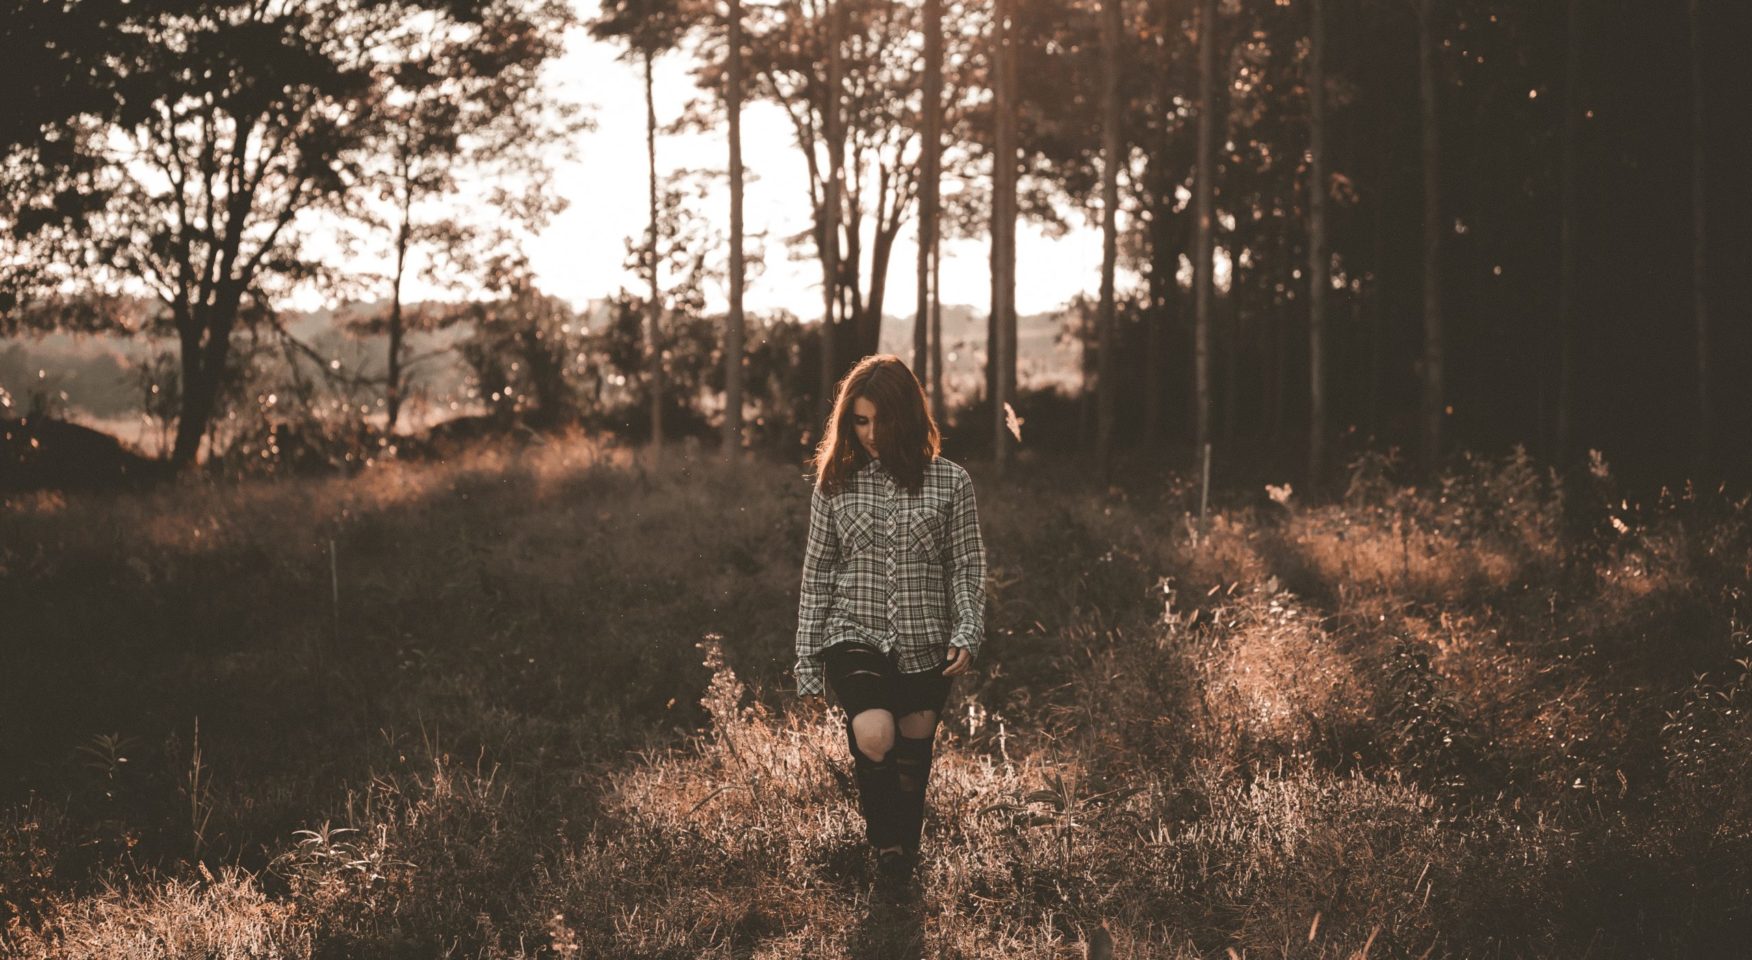 Sepia-tinted photo of woman in plaid shirt walking in forest